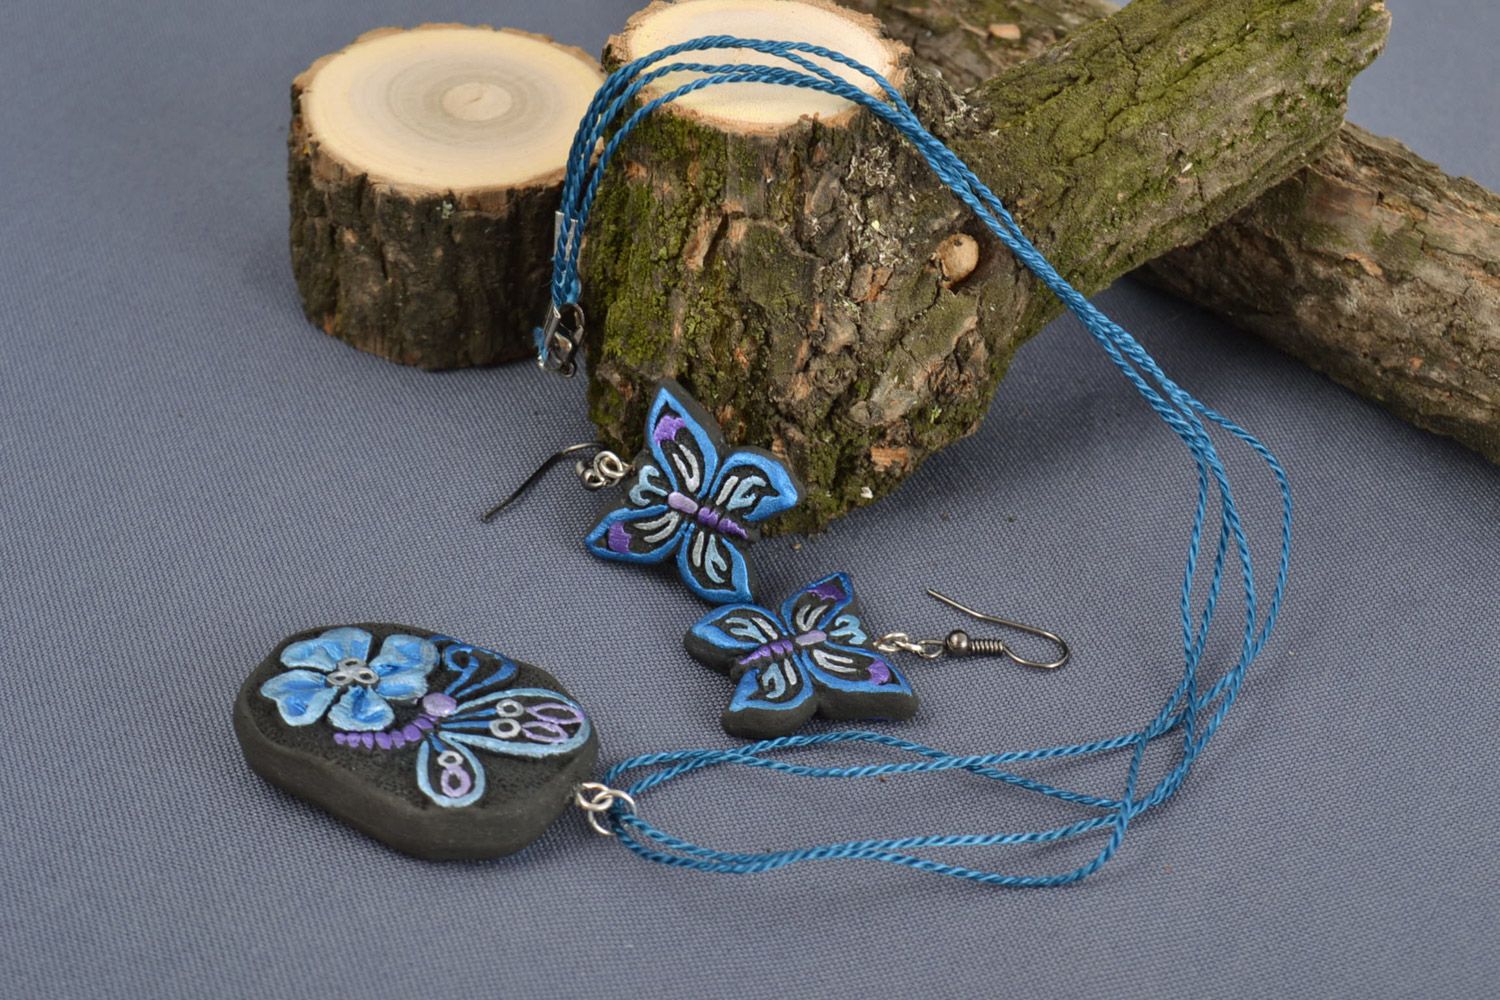 Handmade painted ceramic jewelry set 2 items clay earrings and pendant in the shape of butterflies photo 1